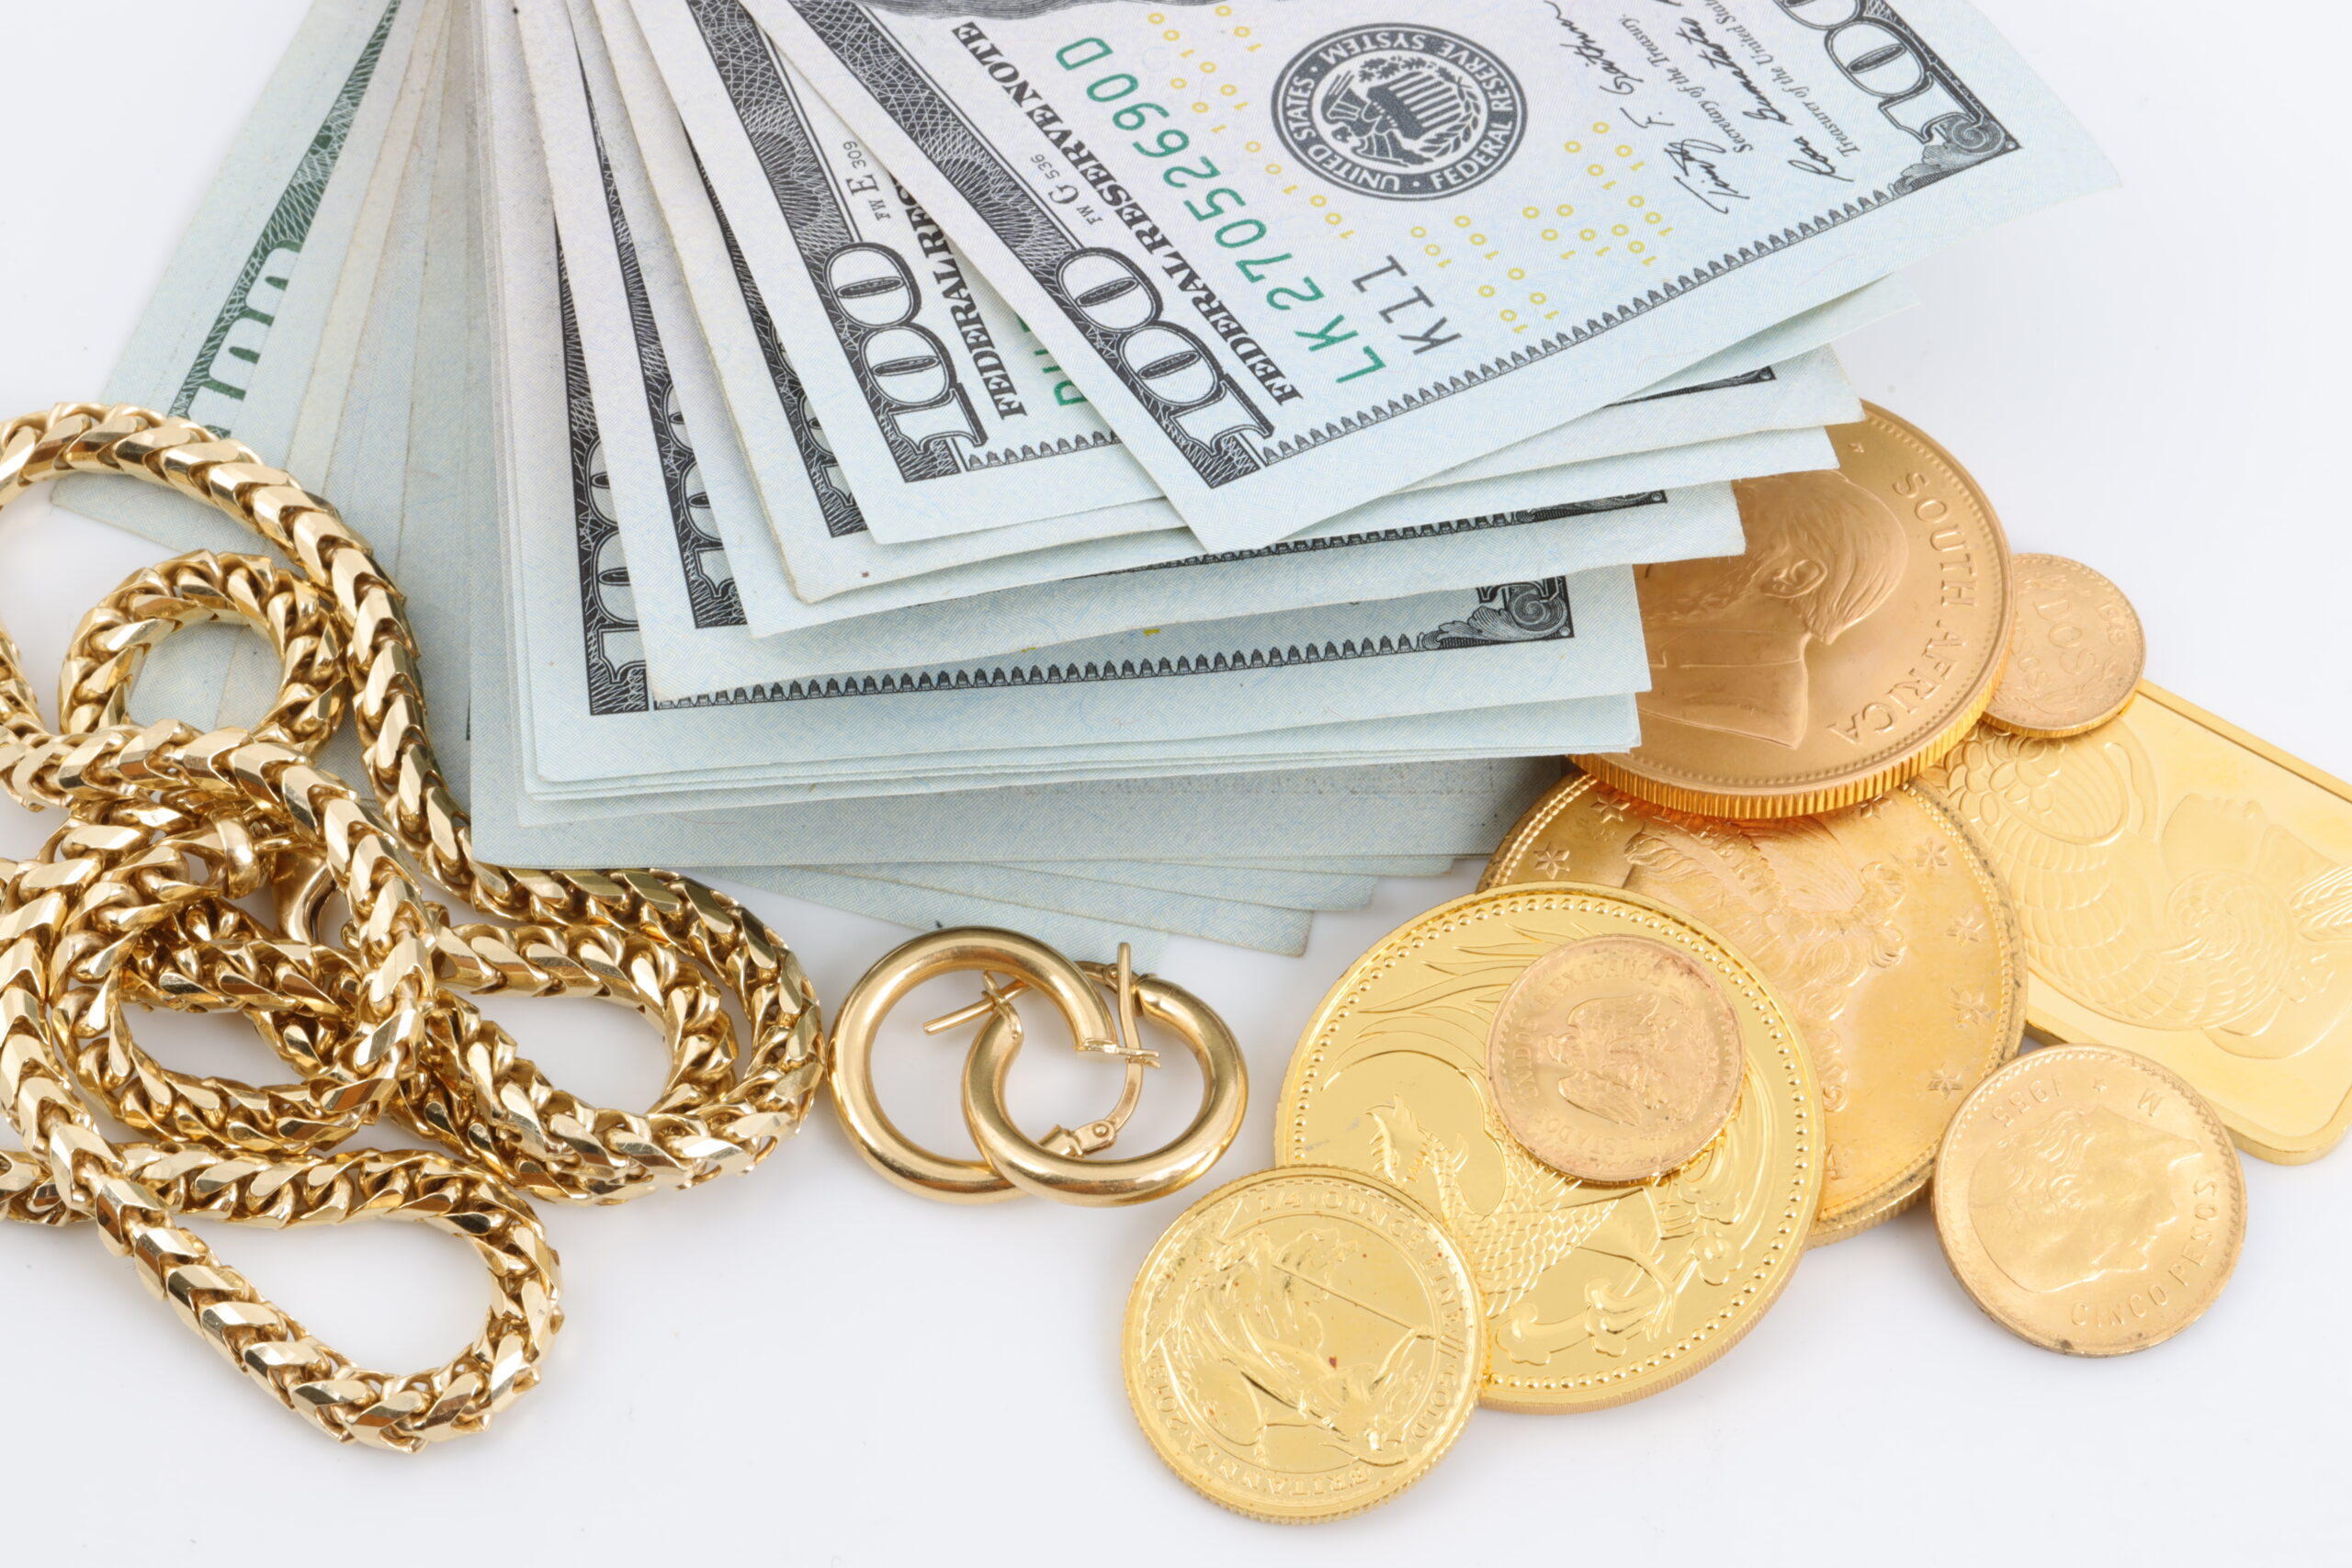 Miscellaneous gold jewelry, along with a stack of money and golden coins